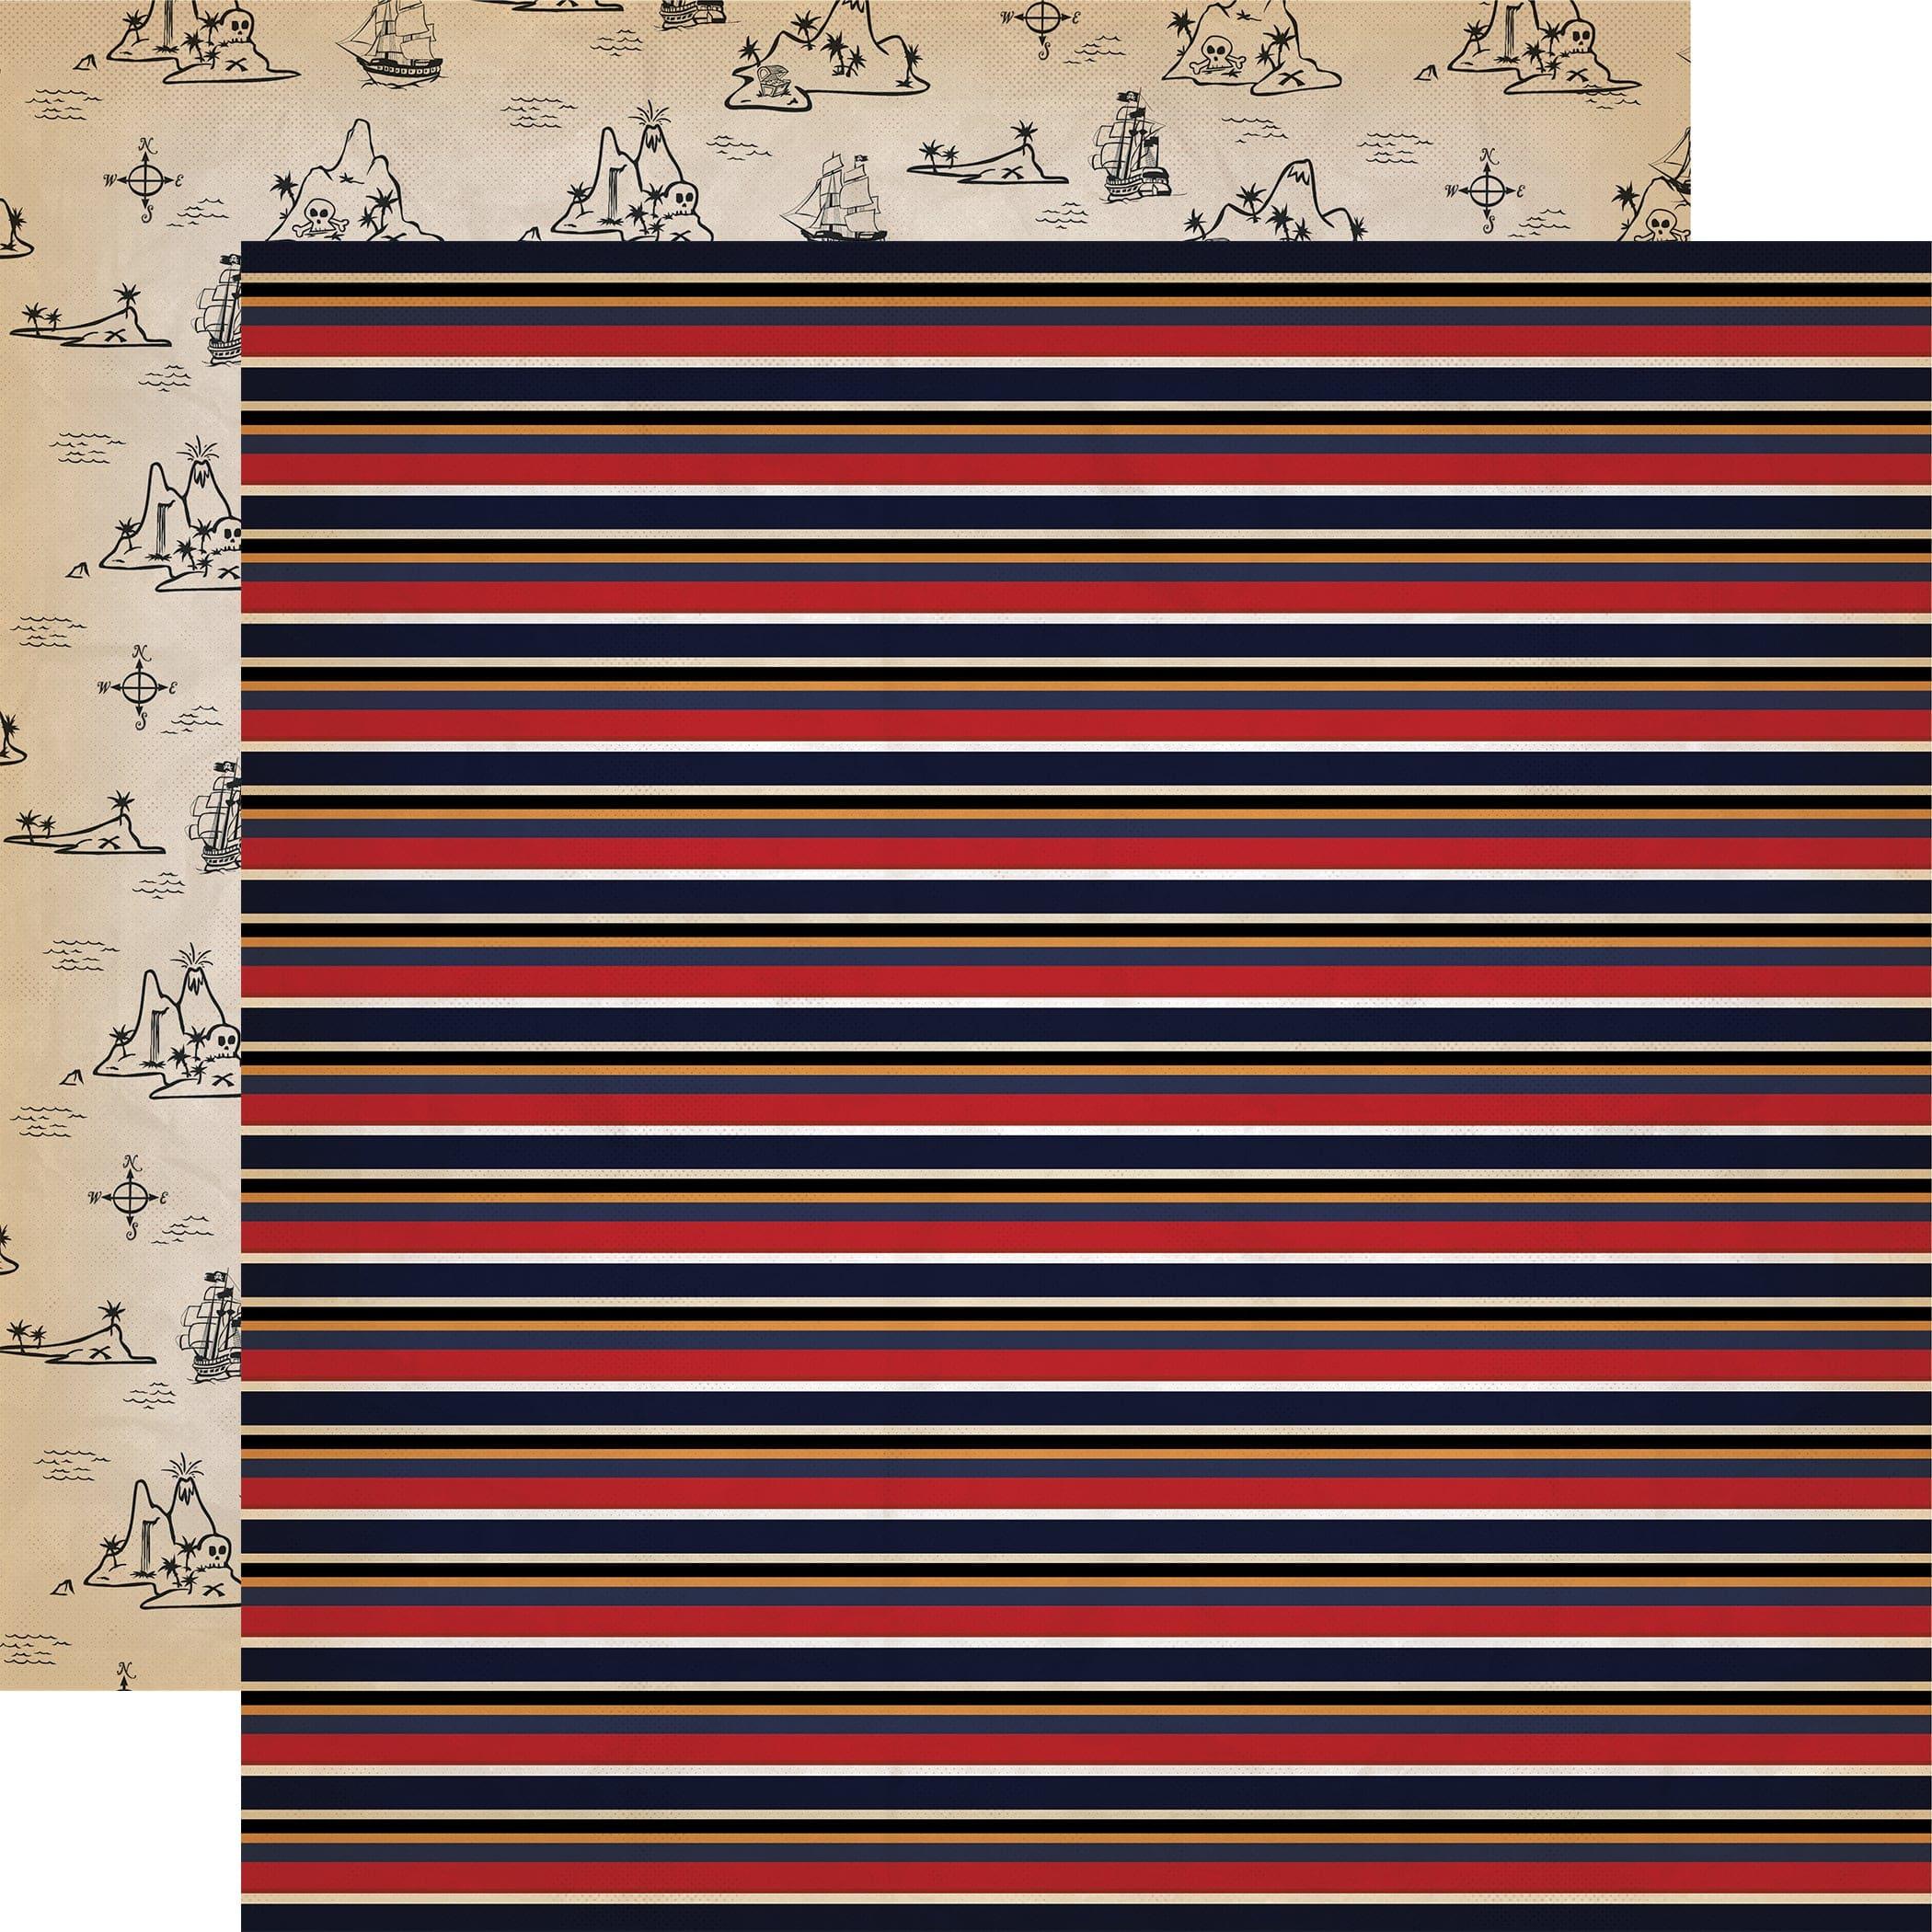 Pirates Collection Scallywag Stripes 12 x 12 Double-Sided Scrapbook Paper by Carta Bella - Scrapbook Supply Companies